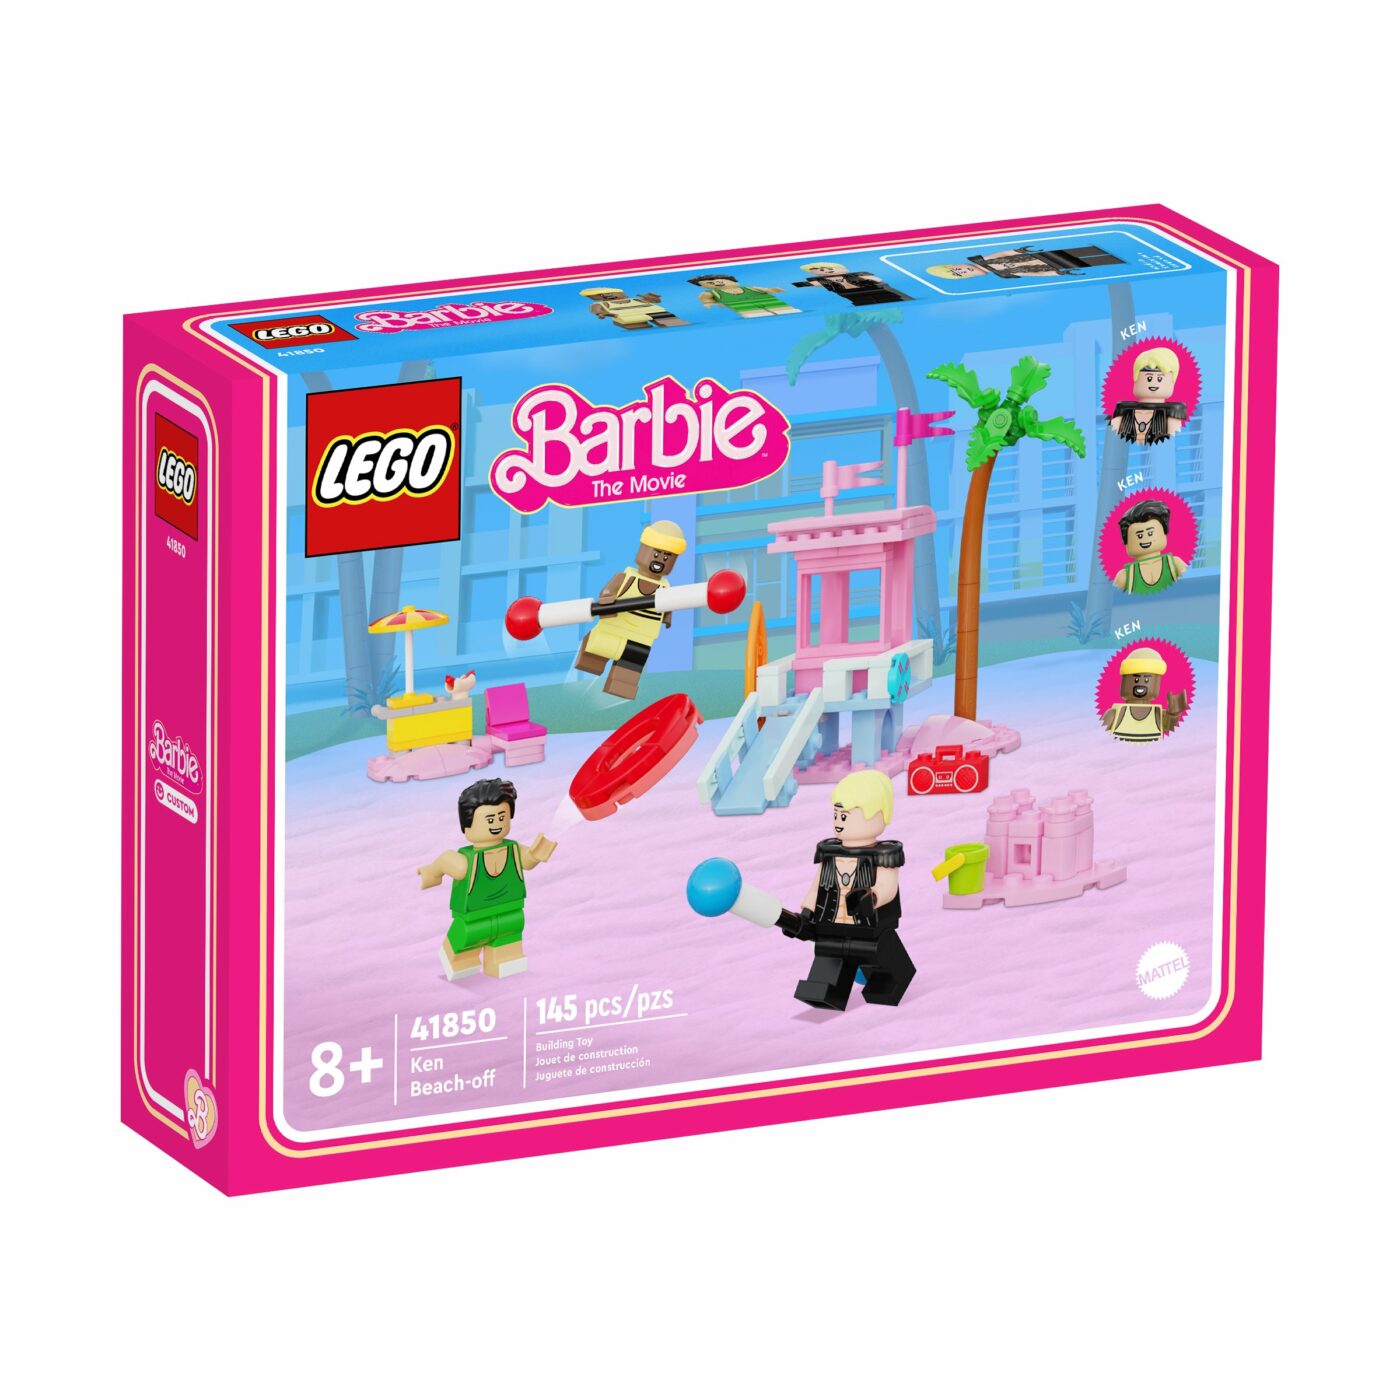 Here’s what a LEGO Barbie Movie theme could look like19